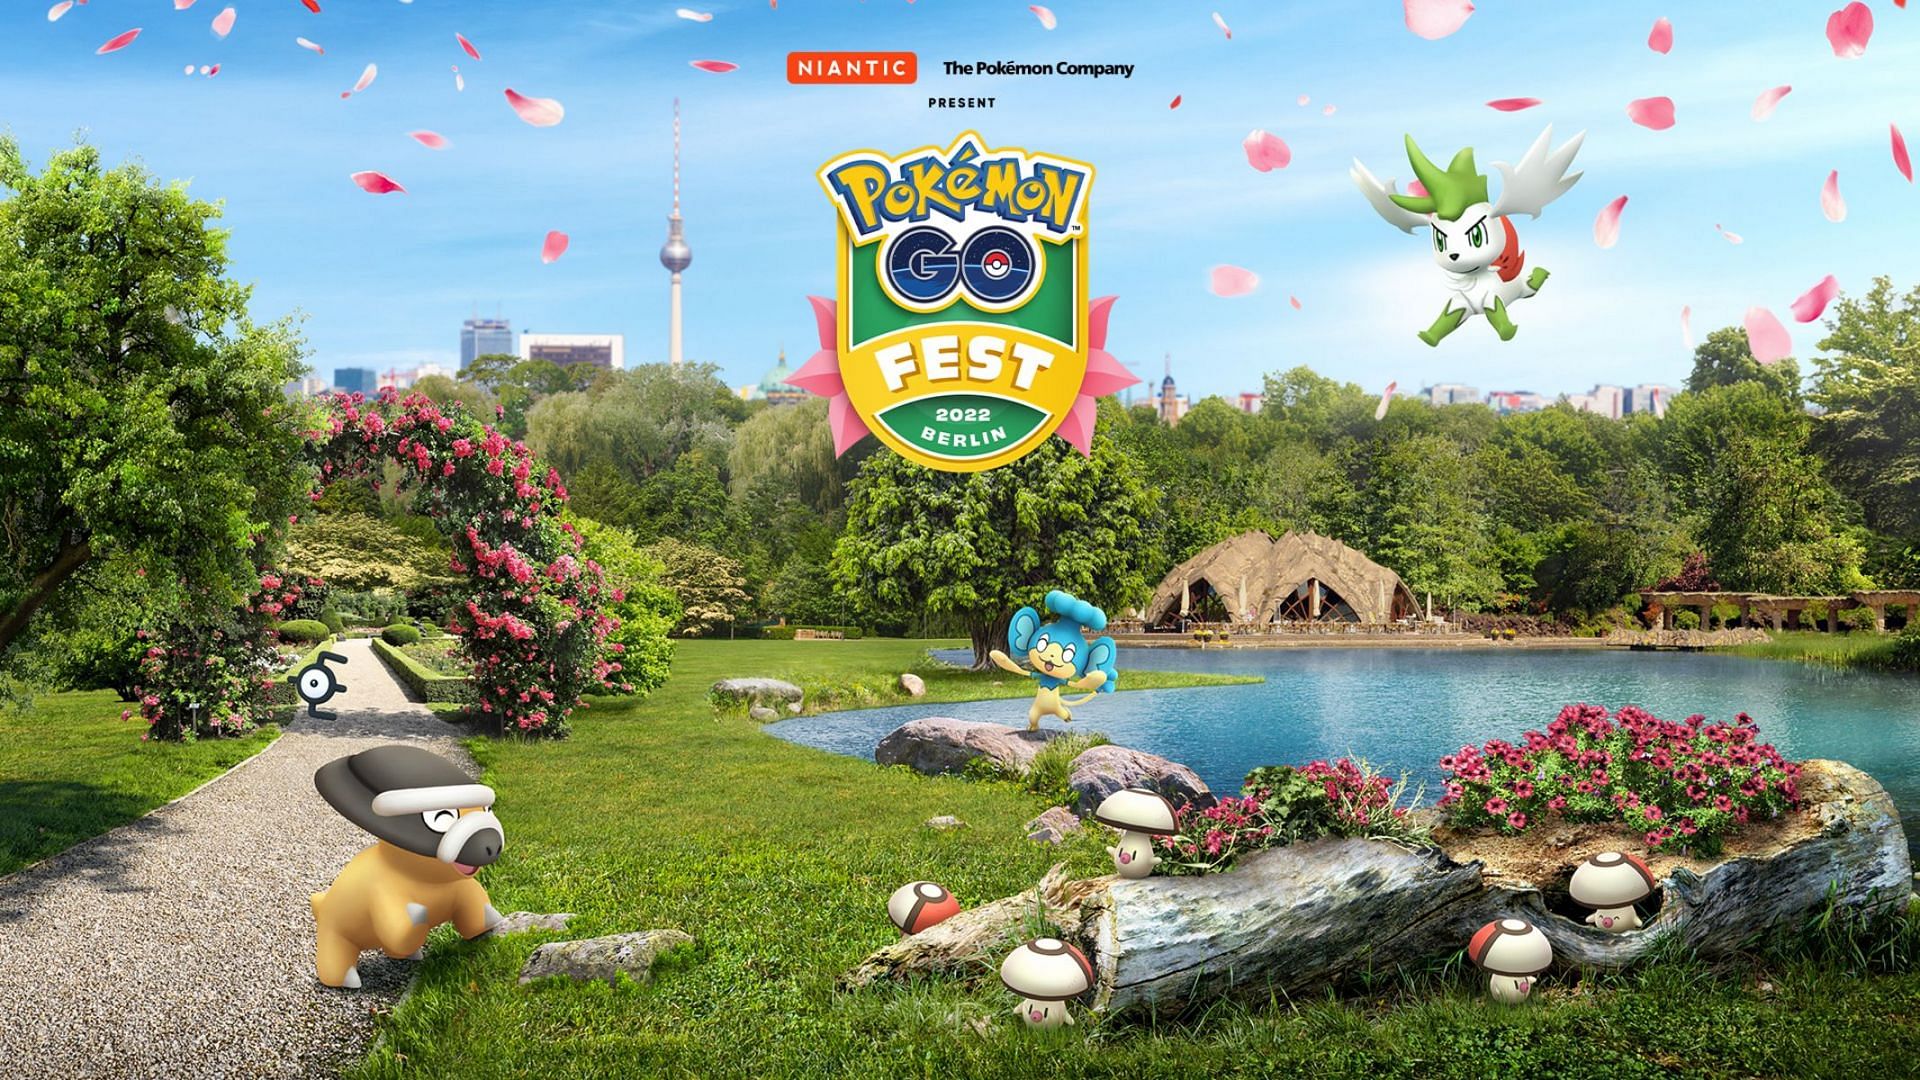  GO Fest has returned to in-person event-hosting, this time in Berlin, Germany (Image via Niantic)